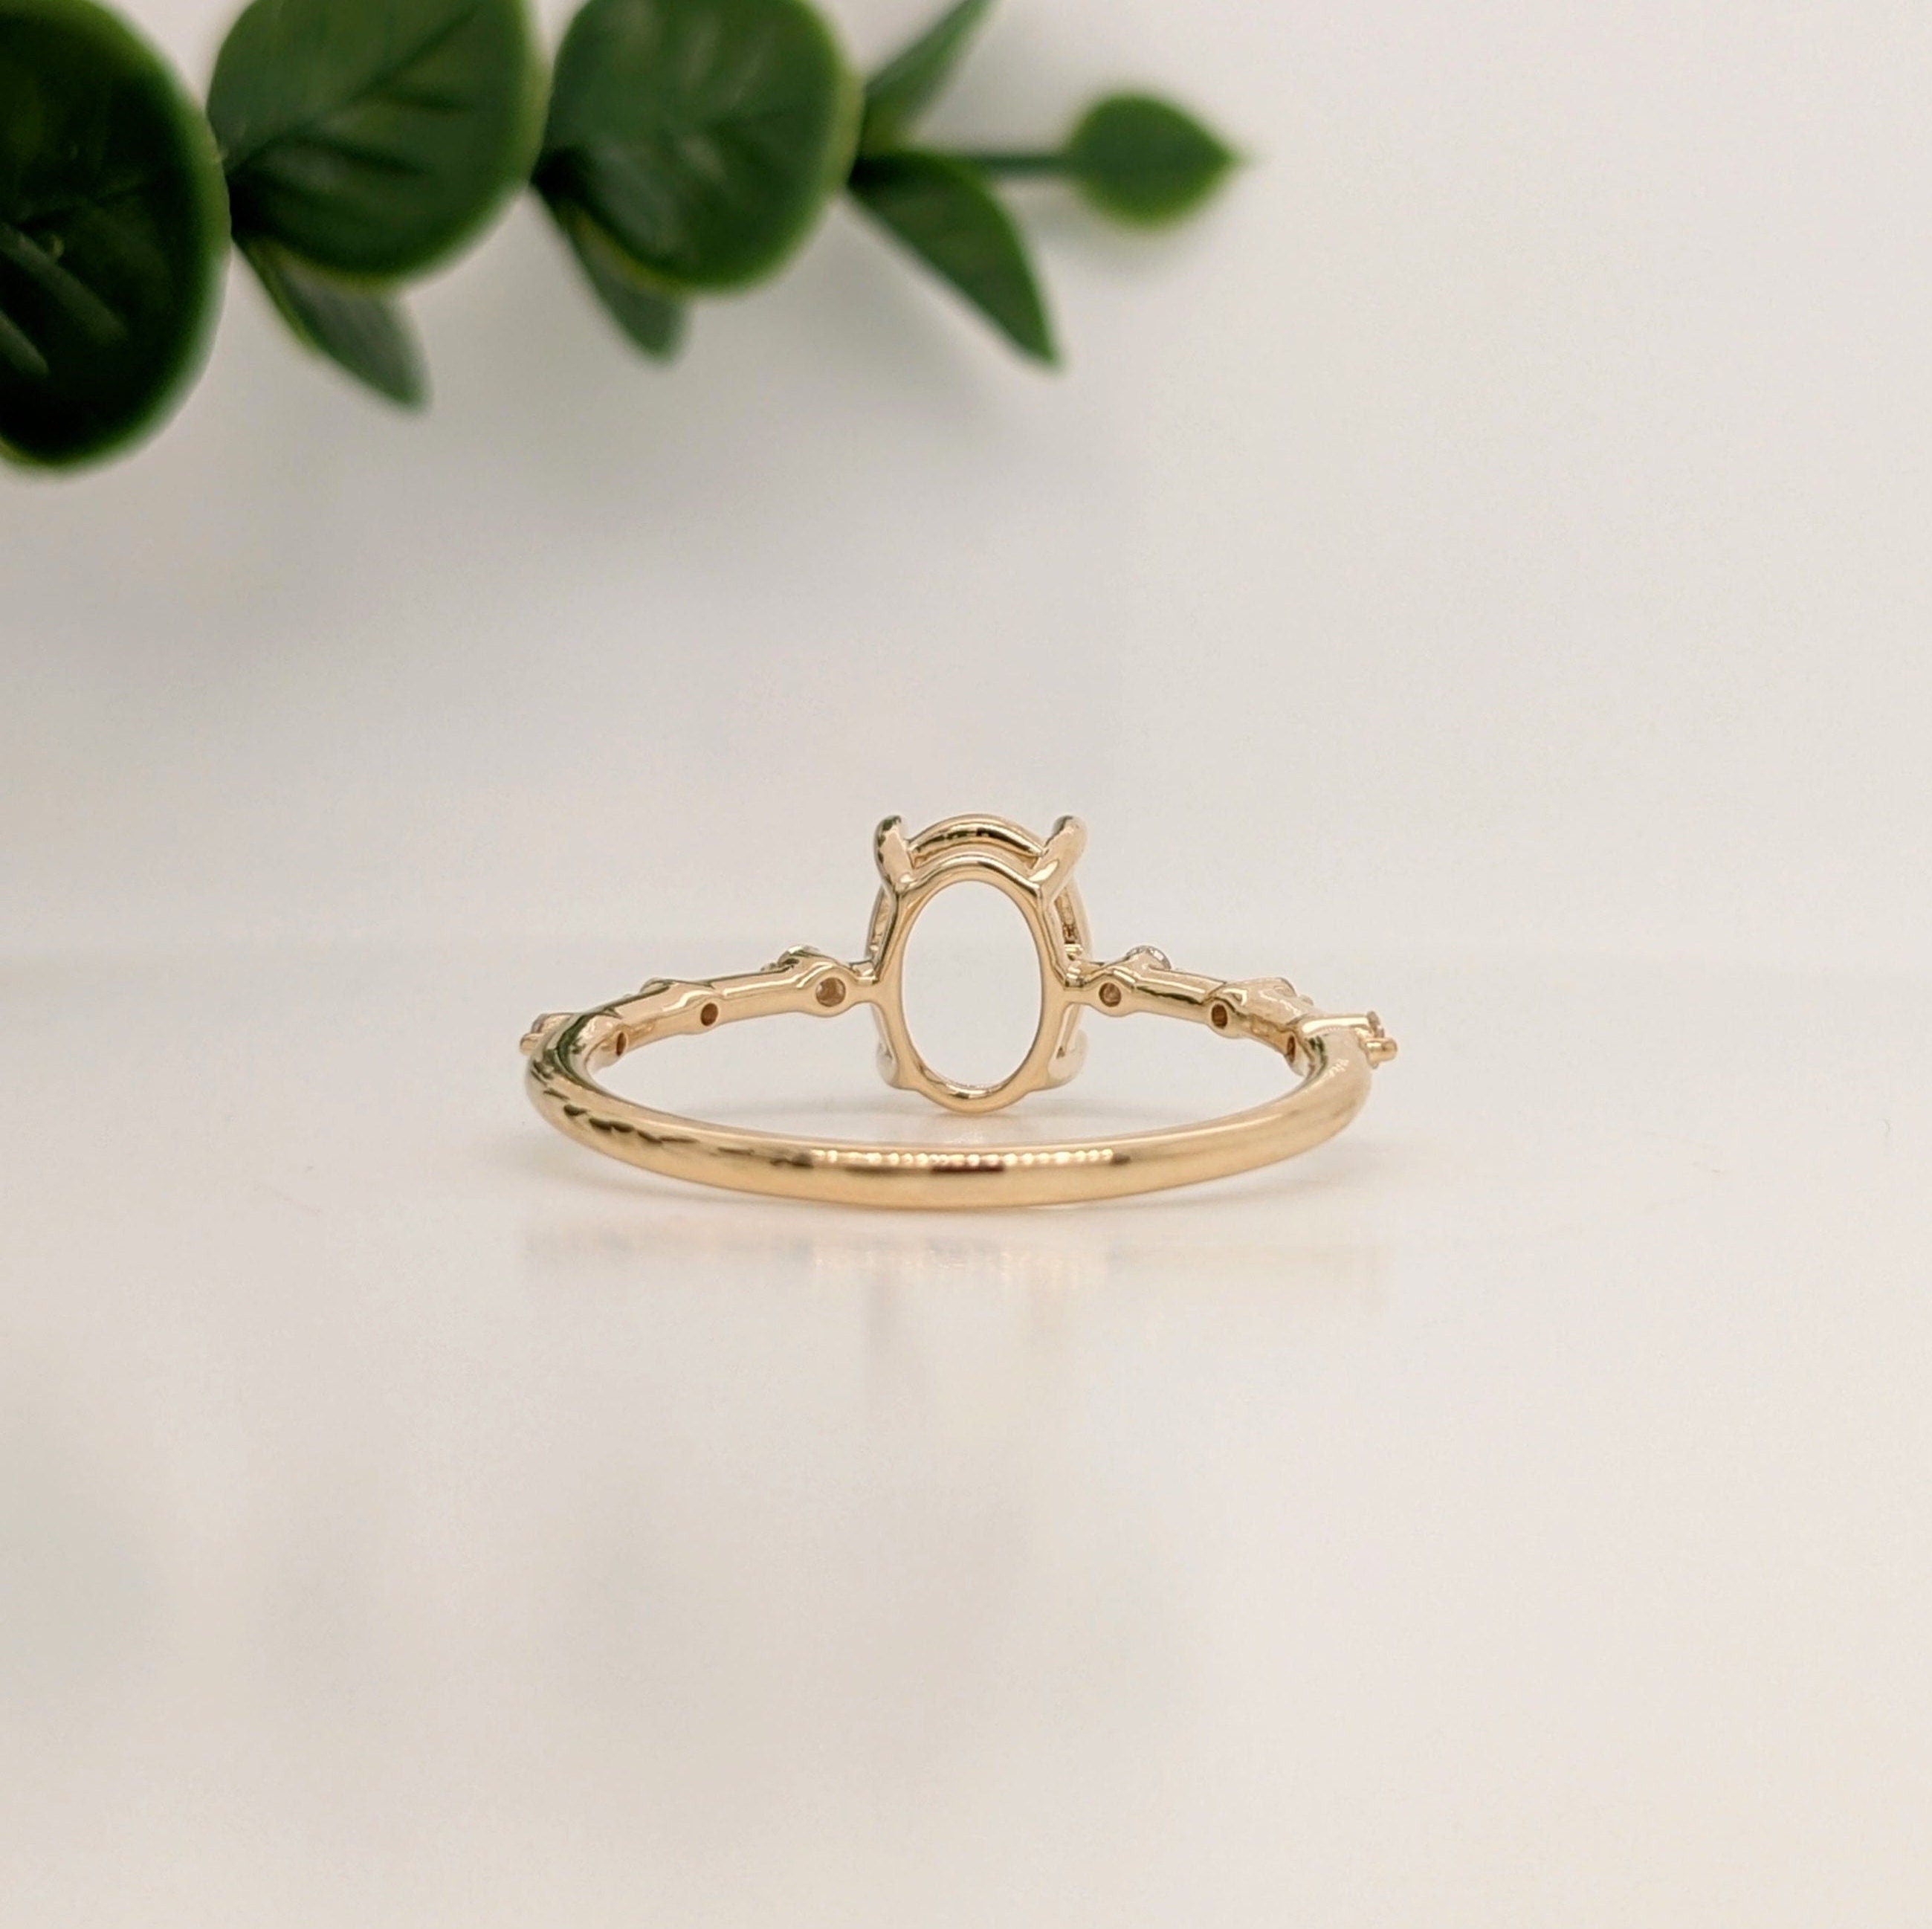 Statement Rings-Classic Solitaire Ring Setting with Minimalist Trio Diamond Accented Shank 14K Gold | Oval 8x6mm | Gemstone Ring Semi Mount | Customizable - NNJGemstones